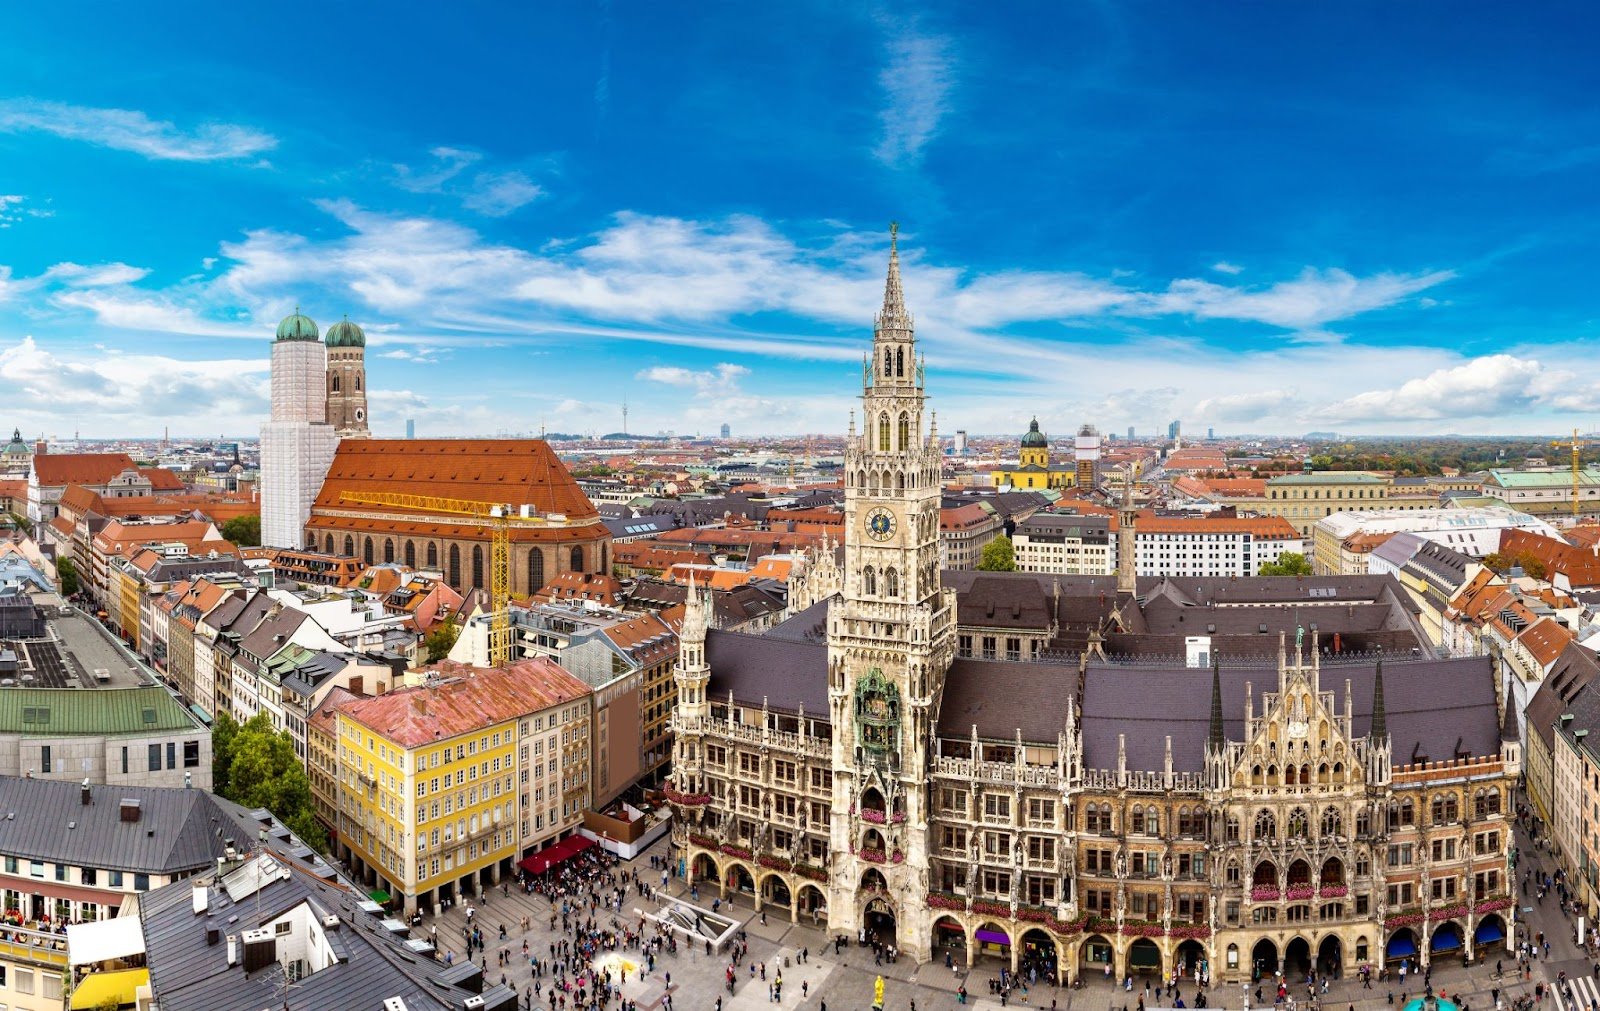 Aerial view of Marienplatz in Munich, with clear blue skies overhead